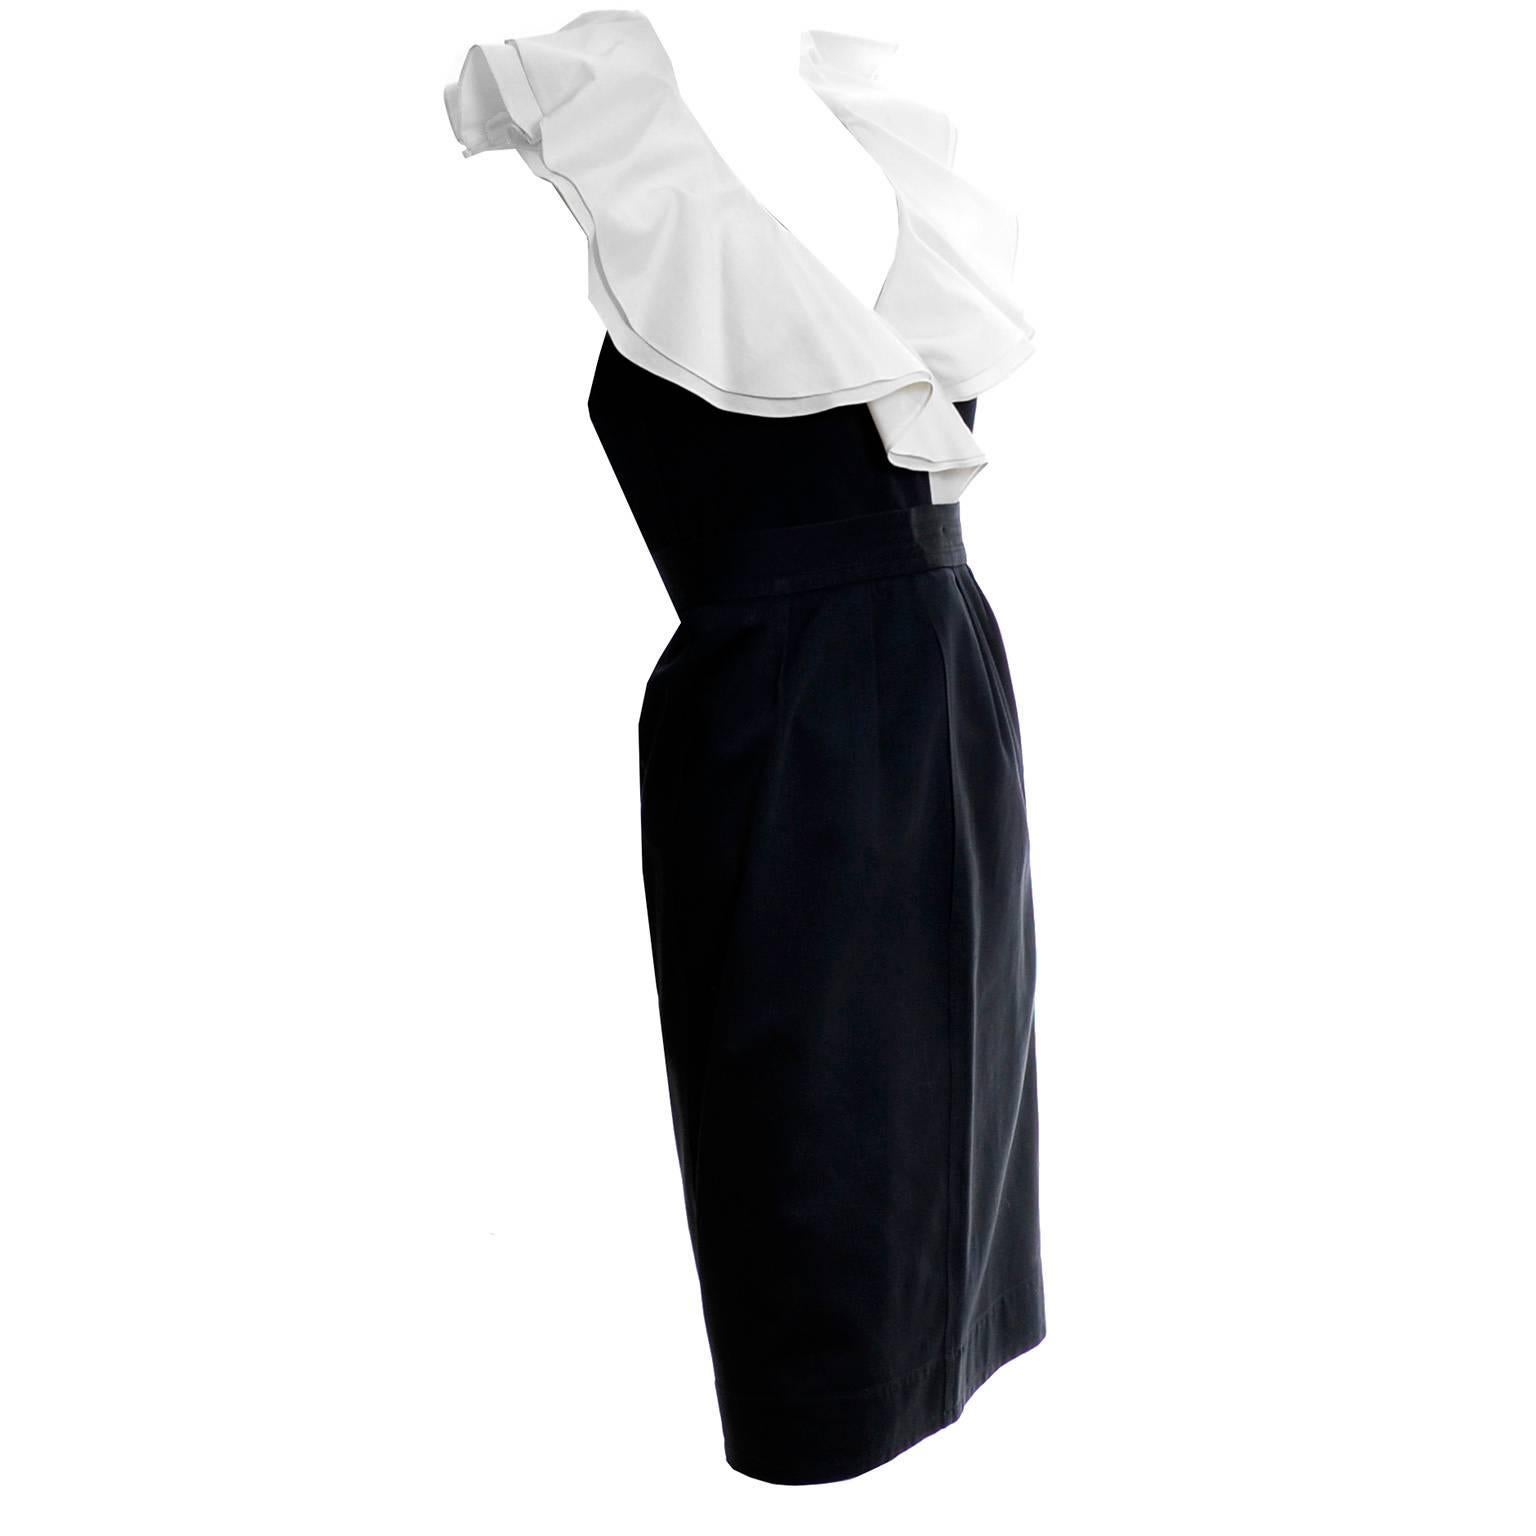 This is a black cotton 2 PC YSL dress has a pretty double layer of white ruffles at the collar. This outfit from Yves Saint Laurent has a button front sleeveless top that is labeled a size 36 and a slim skirt with zipper and hook and eye and side